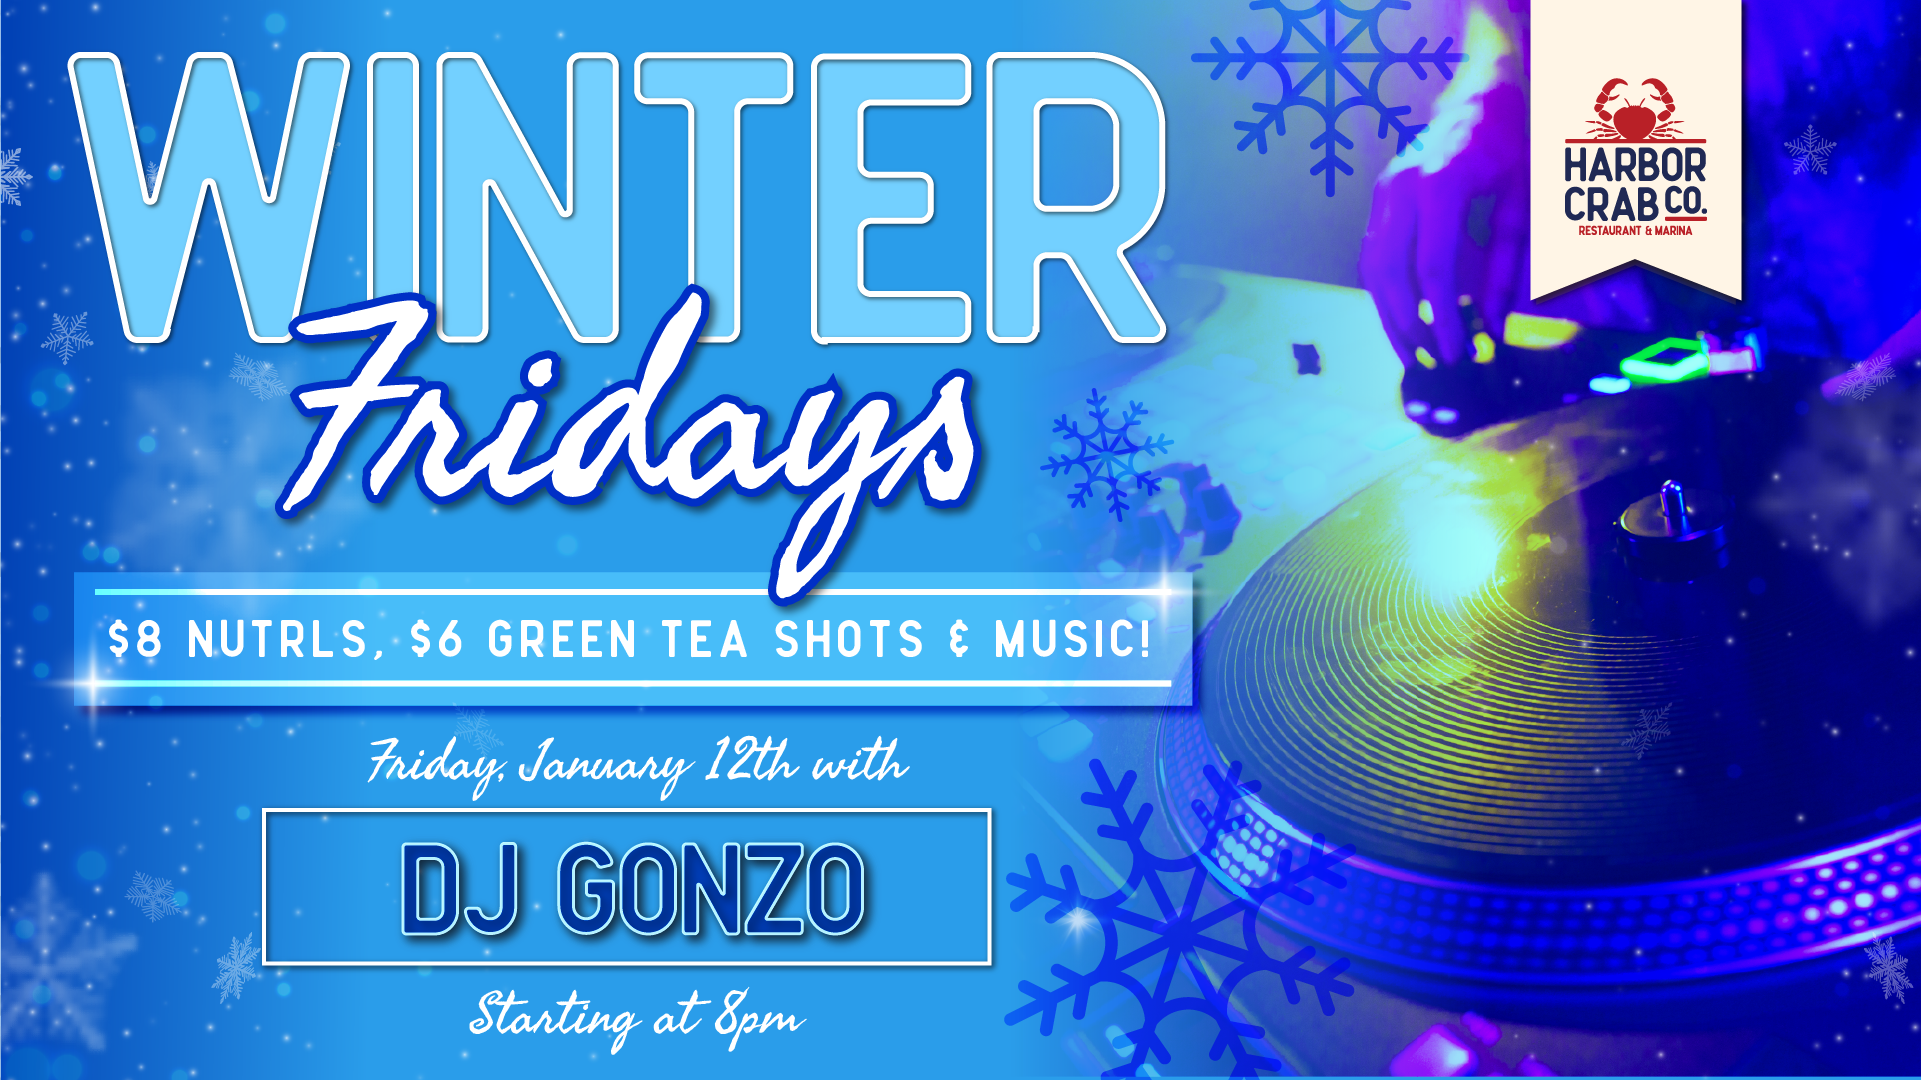 Winter Friday with DJ Gonzo on January 12th at 8:00pm.